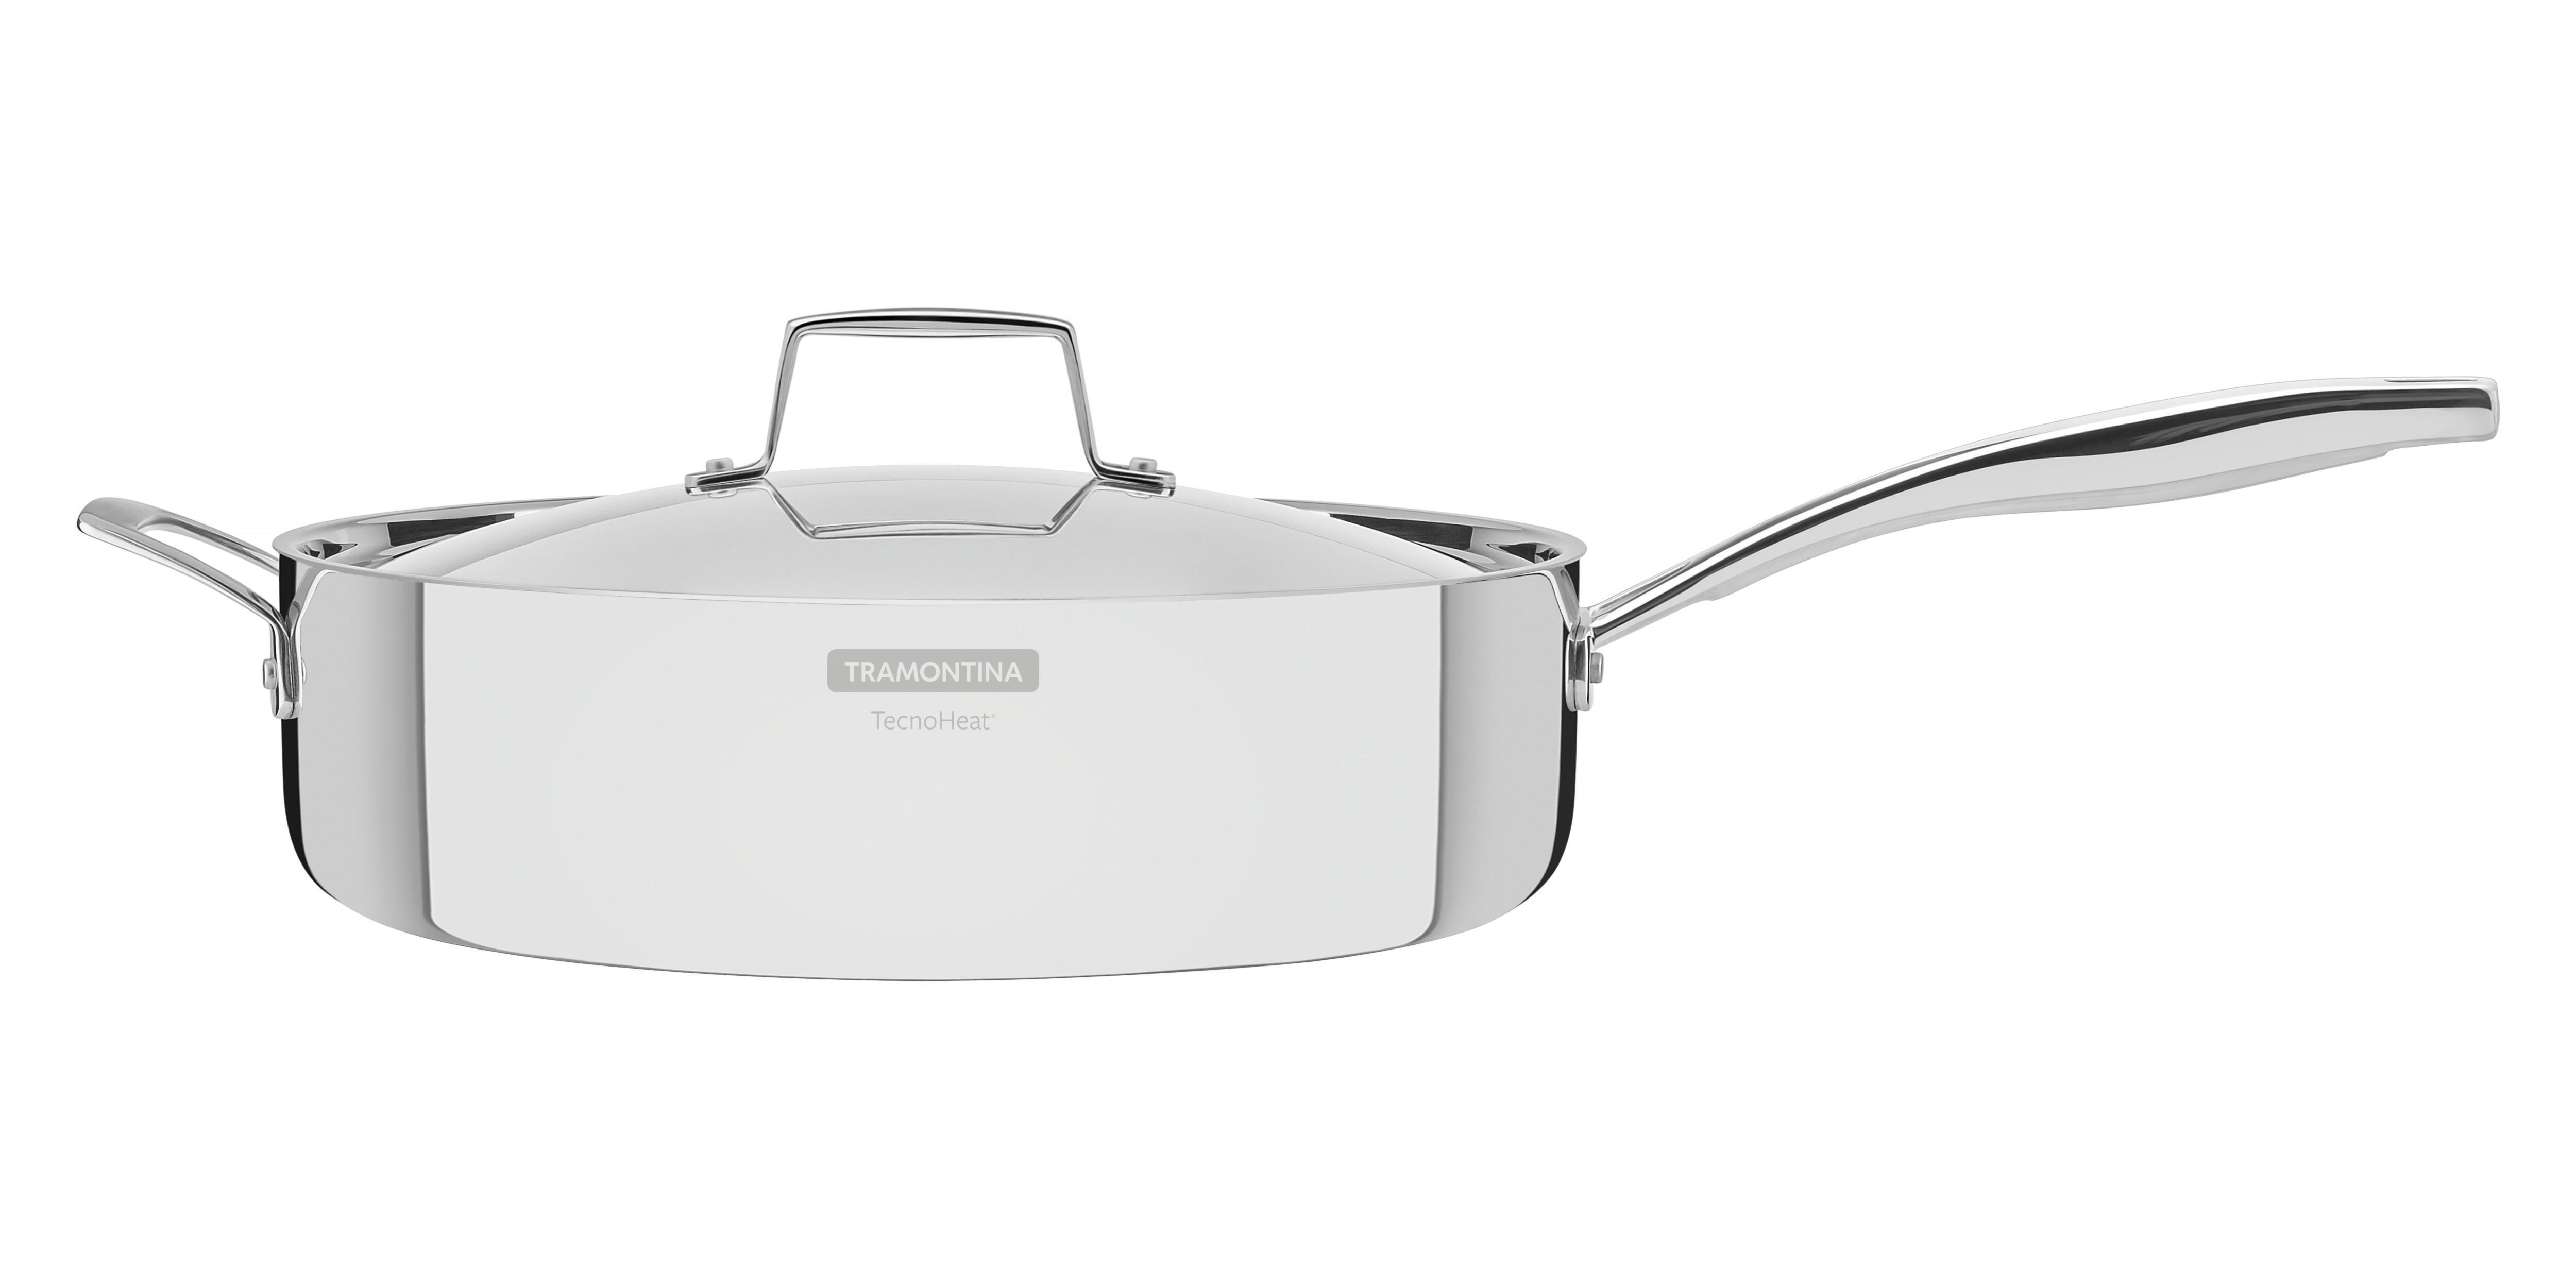 Tramontina Brava Frying Pan Stainless Steel Triple Bottom with Handle 24 cm 2.1 L 62415240